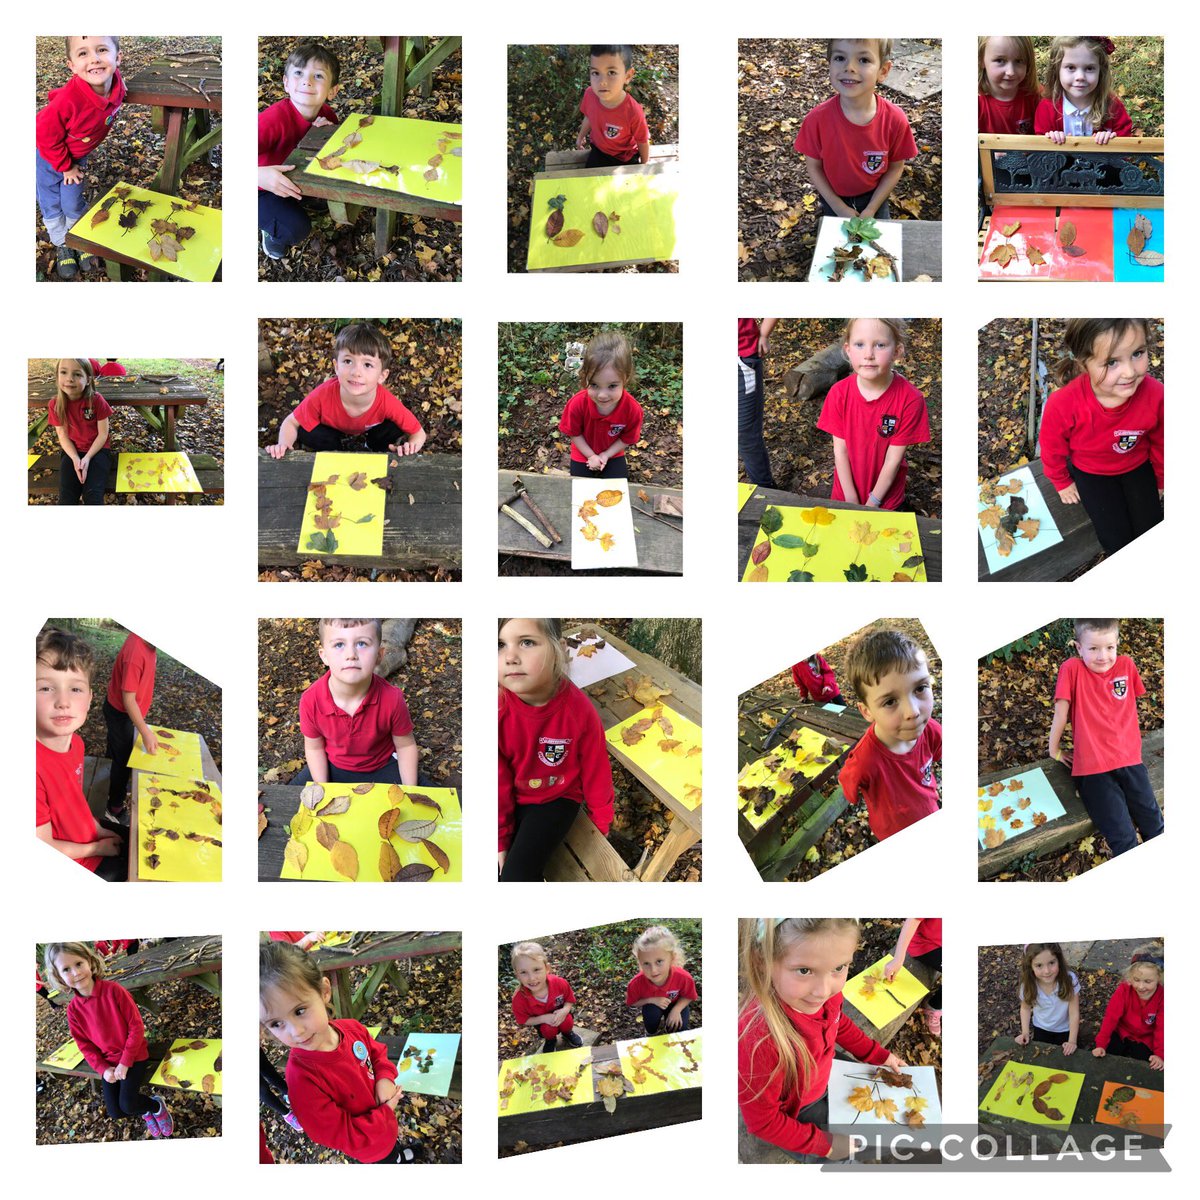 Lower Phase have enjoyed their outdoor learning this week - they formed their initials using the Autumnal Fallen Leaves #capablelearners #confidentlearners